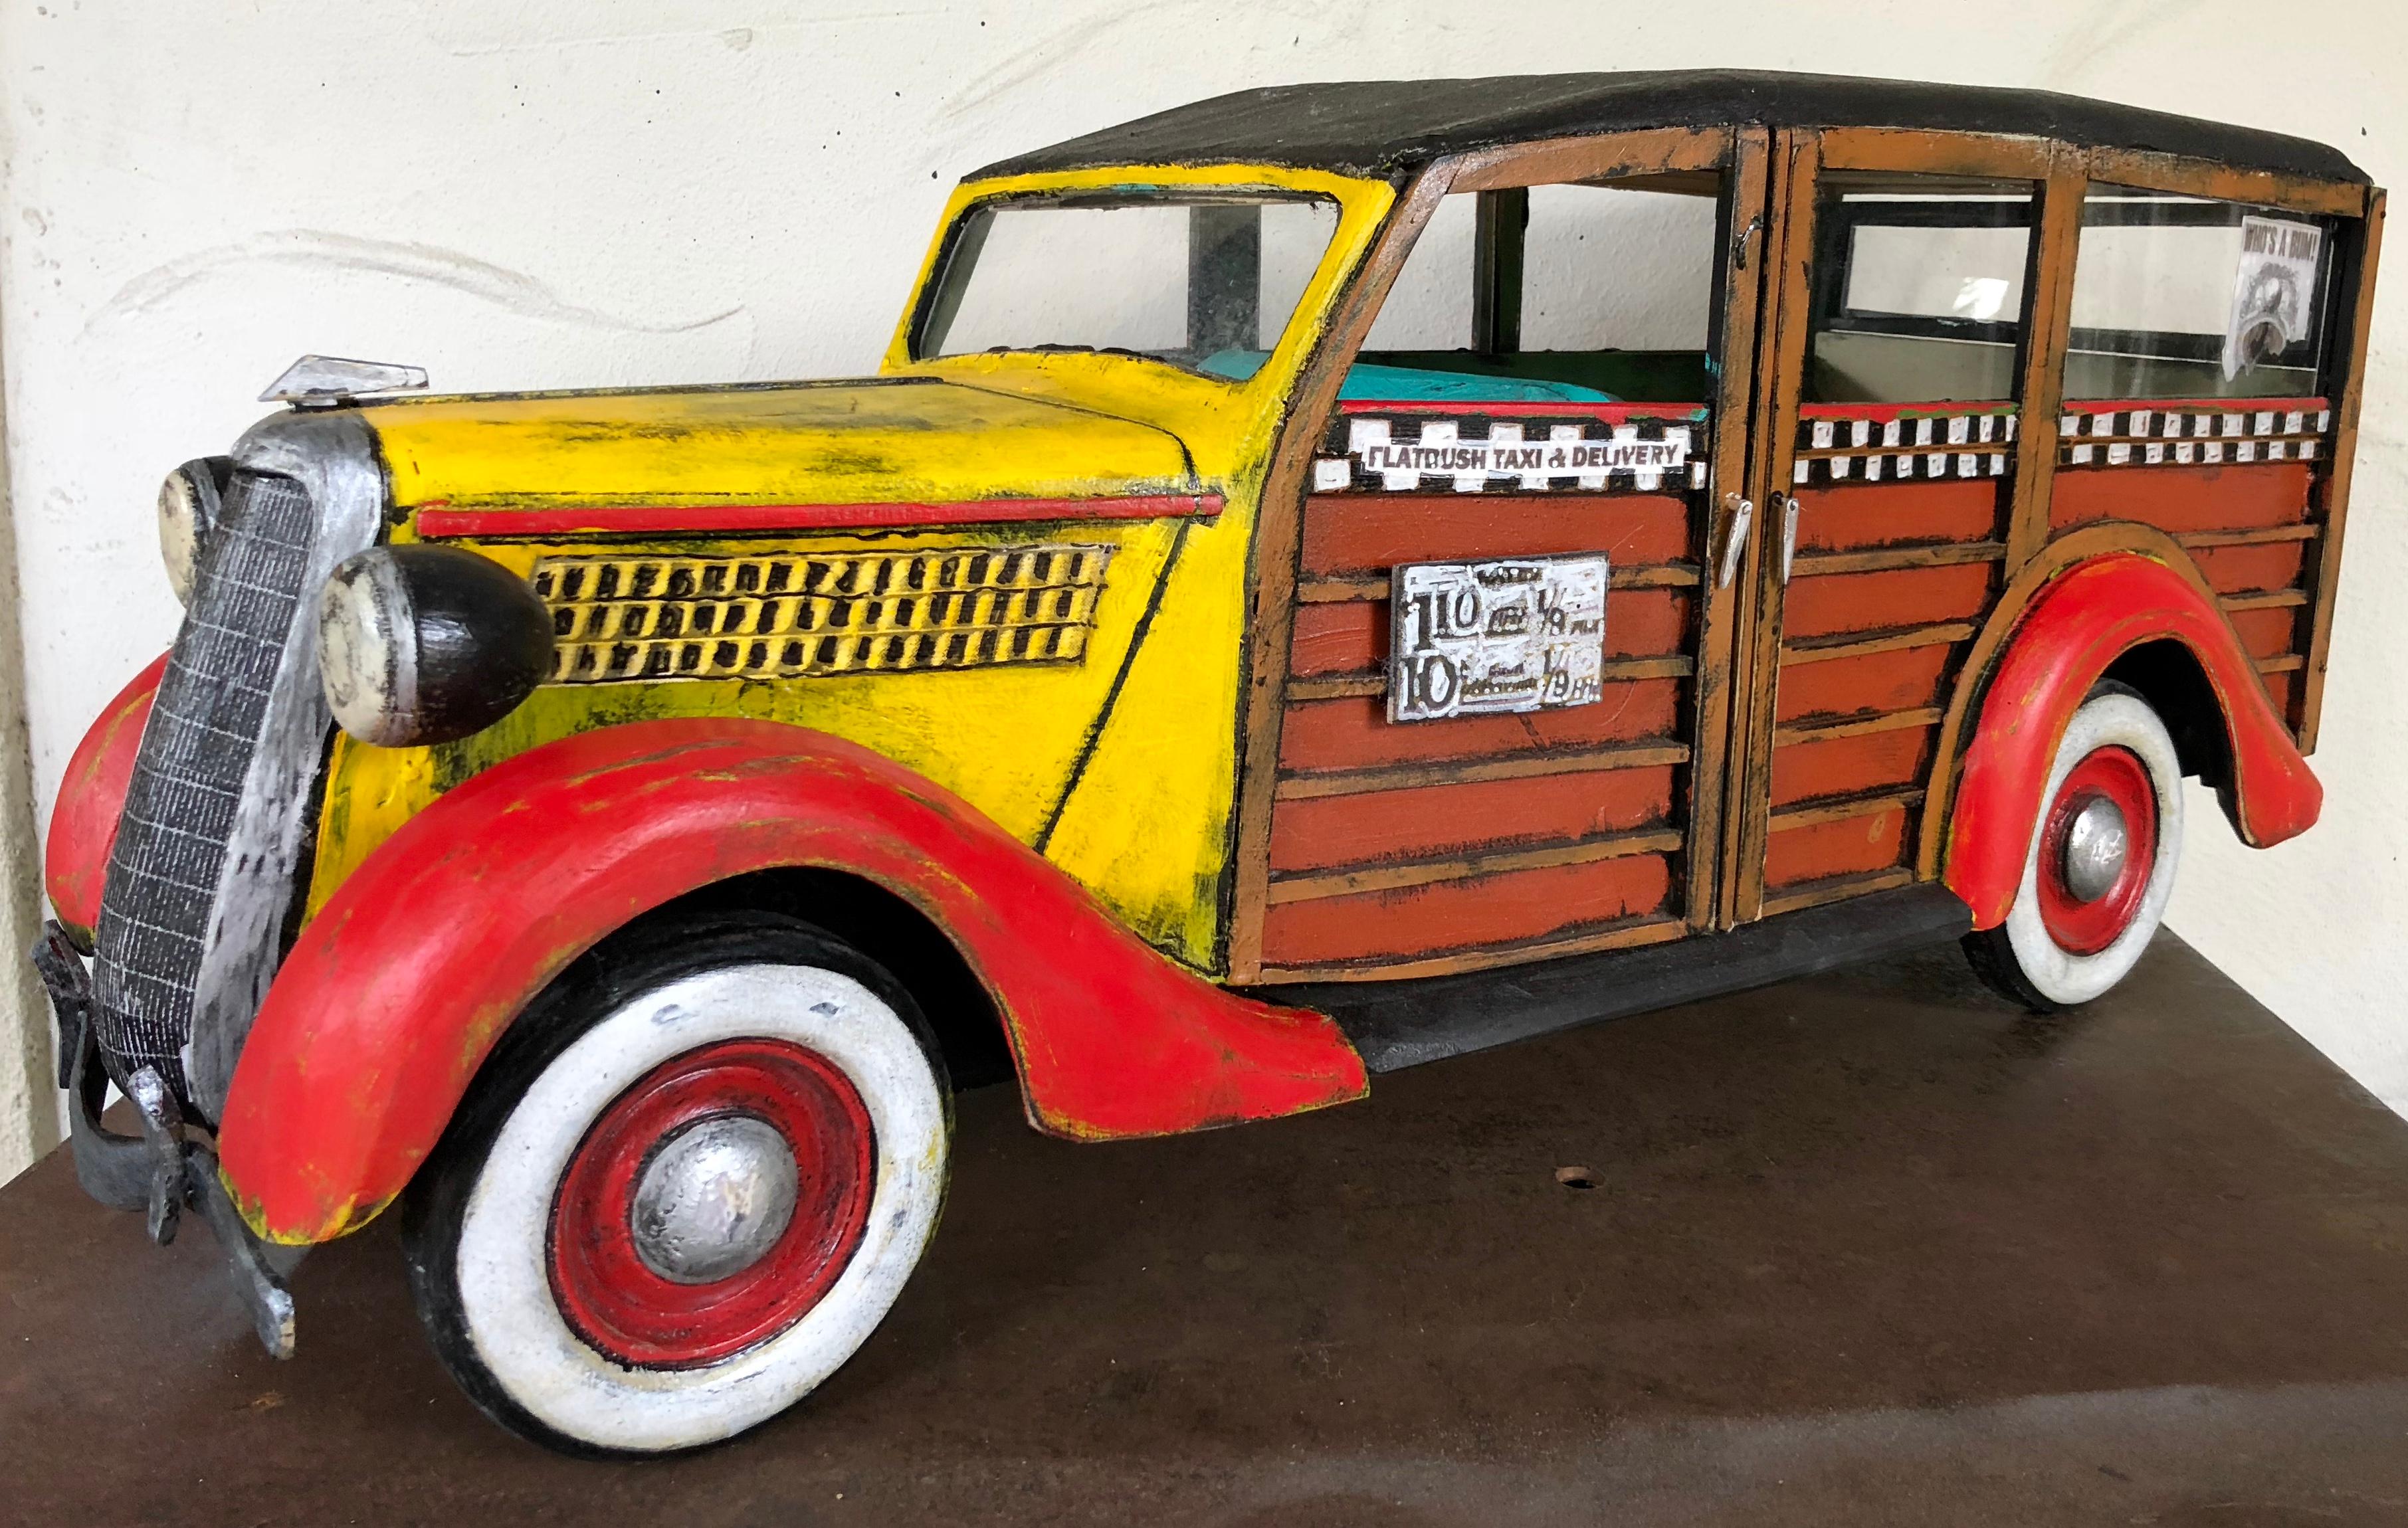 Custom sculpture constructed of painted wood.
Paul Jacobsen used everyday objects, such as chairs, cars, airplanes, trains, motorcycles and puzzles, all built from scratch and turns them into haunting and very desirable works of art. Among his most